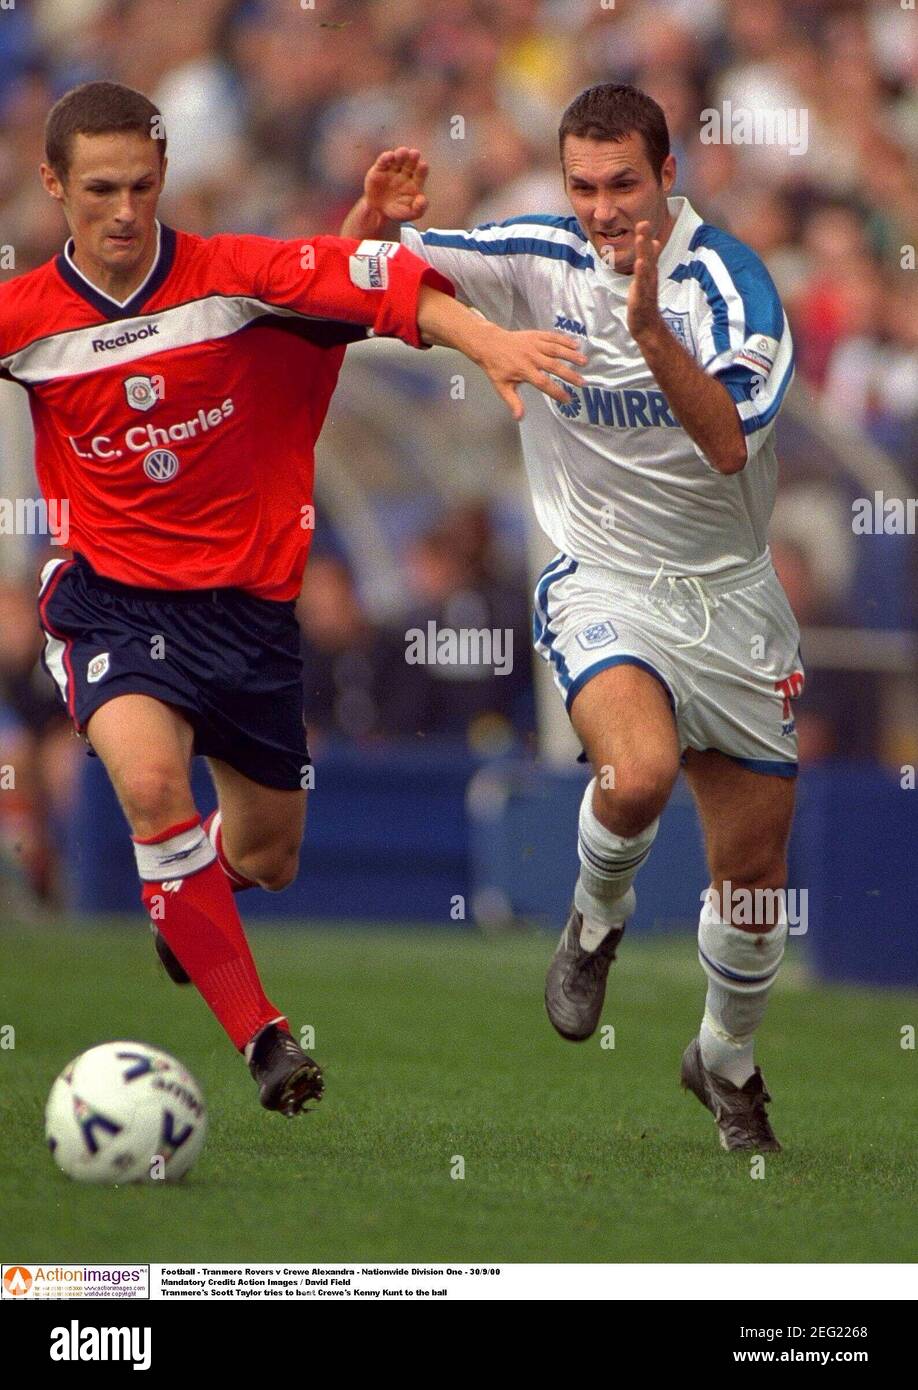 Football - Tranmere Rovers v Crewe Alexandra - Nationwide Division One - 30/9/00  Mandatory Credit: Action Images / David Field  Tranmere's Scott Taylor tries to beat Crewe's Kenny Kunt to the ball Stock Photo